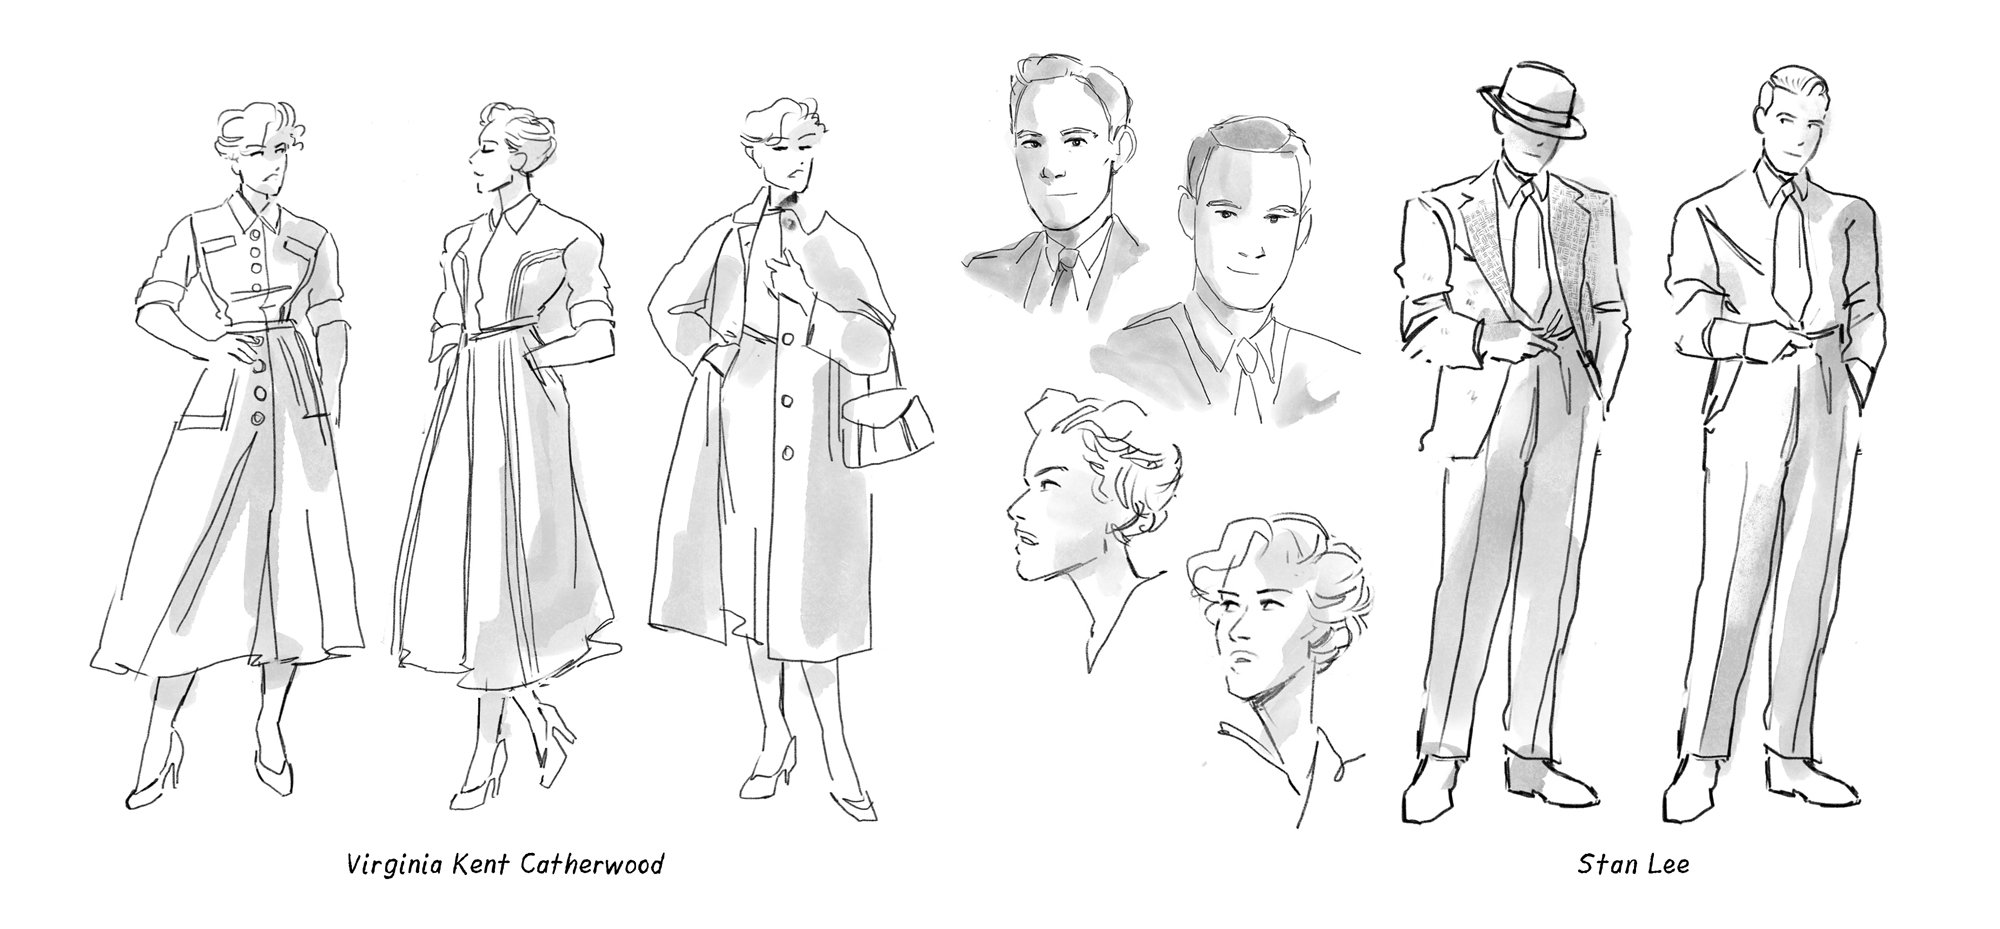  Research – Secondary character design 